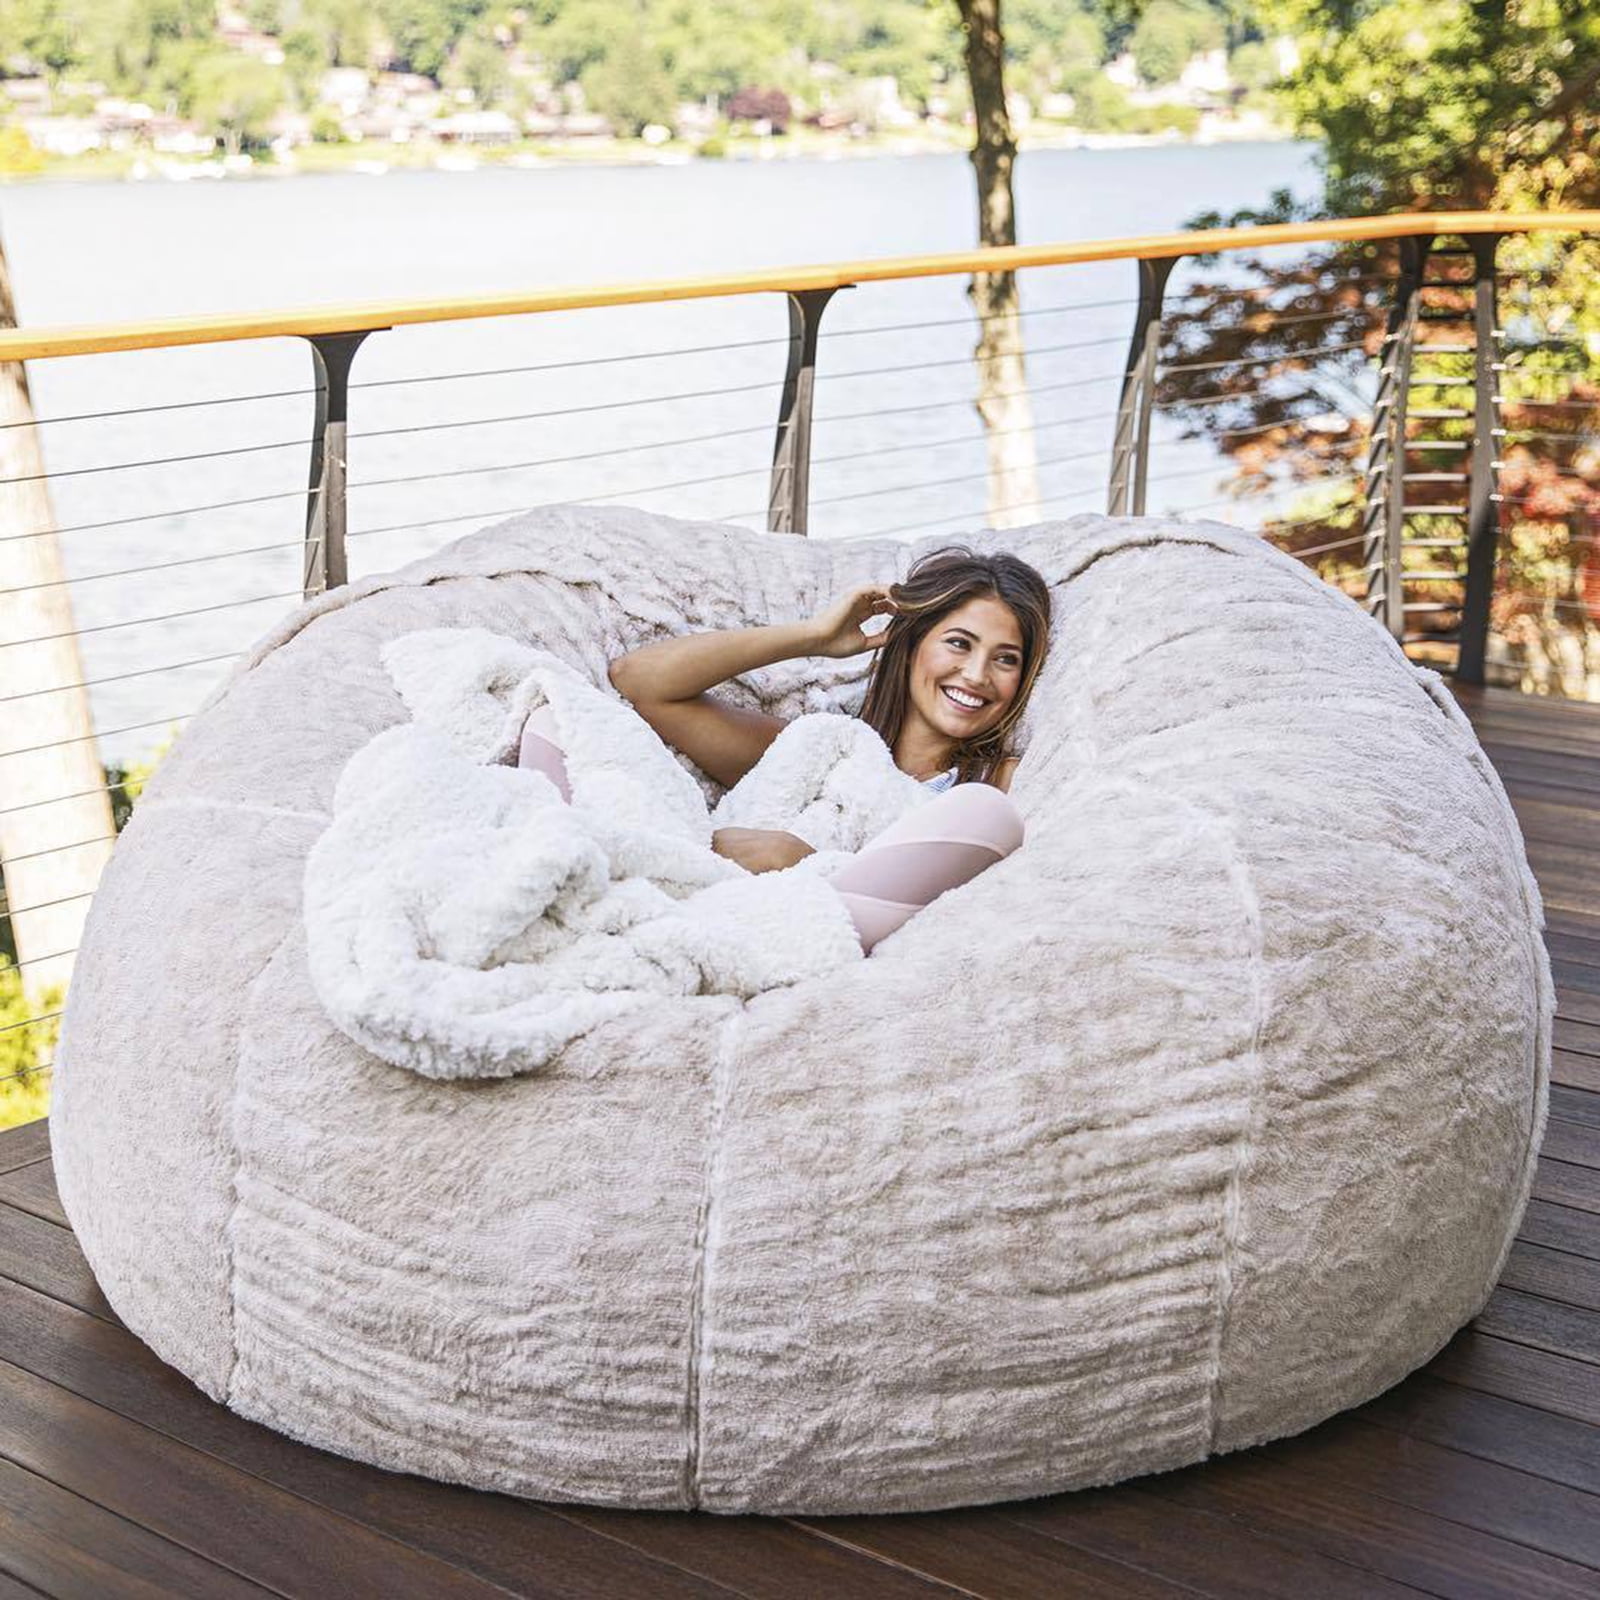 Cttasty Human Dog Bed, Human Sized Dog Bed 70.9 x 53.15 x 13.78, Large Bean  Bag Bed with Blankets, Adult Nap Bed, Human Dog Bed for People Adults, Grey  - Newegg.com